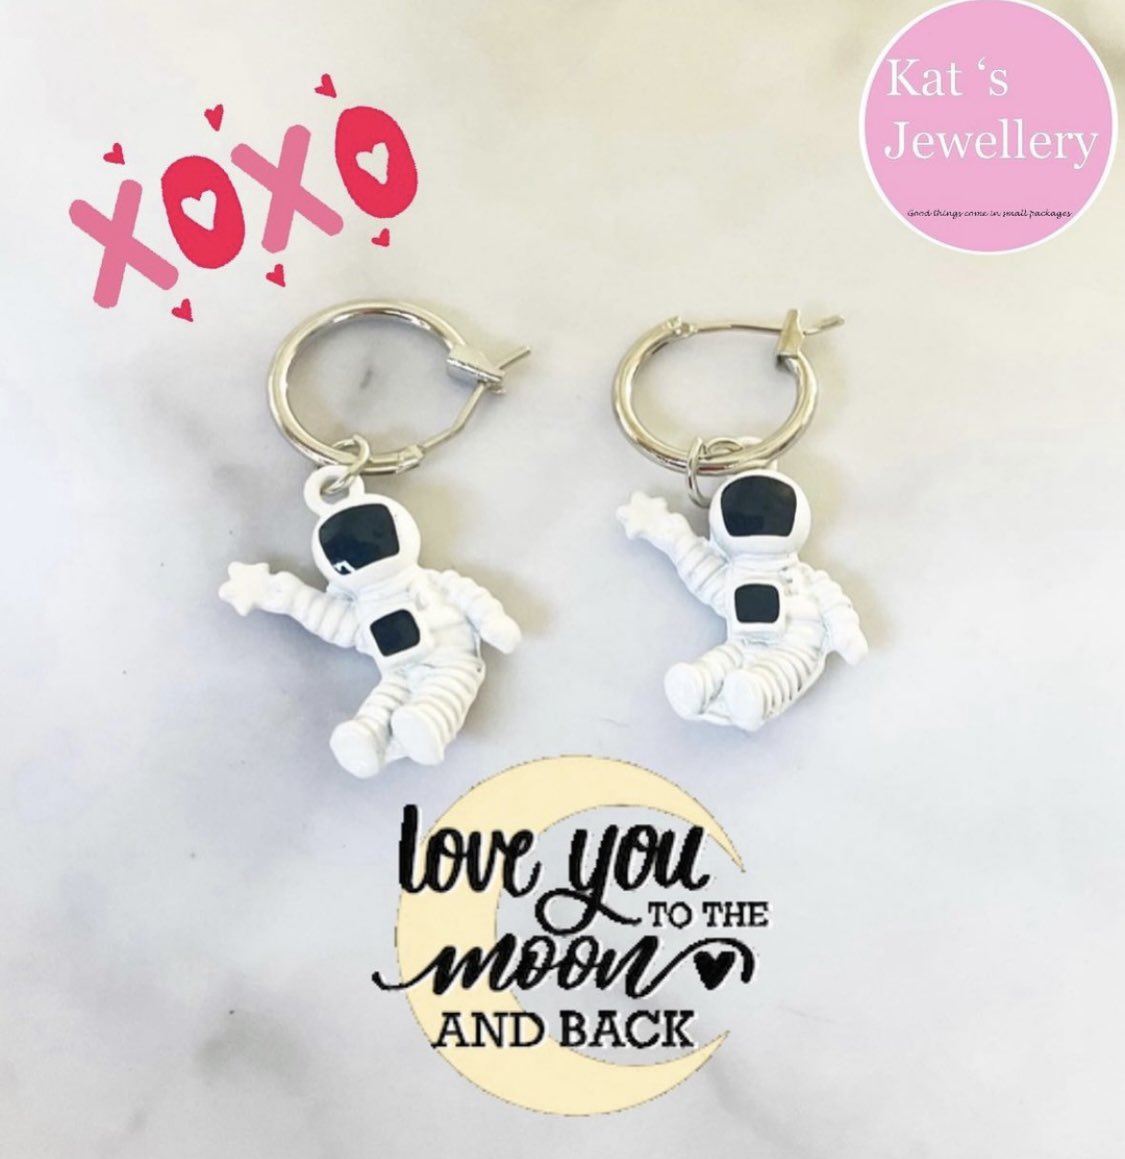 Love you to the moon and back 🌙 katsjewellery1.etsy.com/uk/listing/109… #valentines #valentinesday #valentinesgifts #valentinesdaygiftideas #shop #sale #sweets #candy #loveyoutothemoonandback #noveltygifts #uniquegifts #foodgifts #loveyoutothemoonandbackgifts #astronaut #astronautearrings.